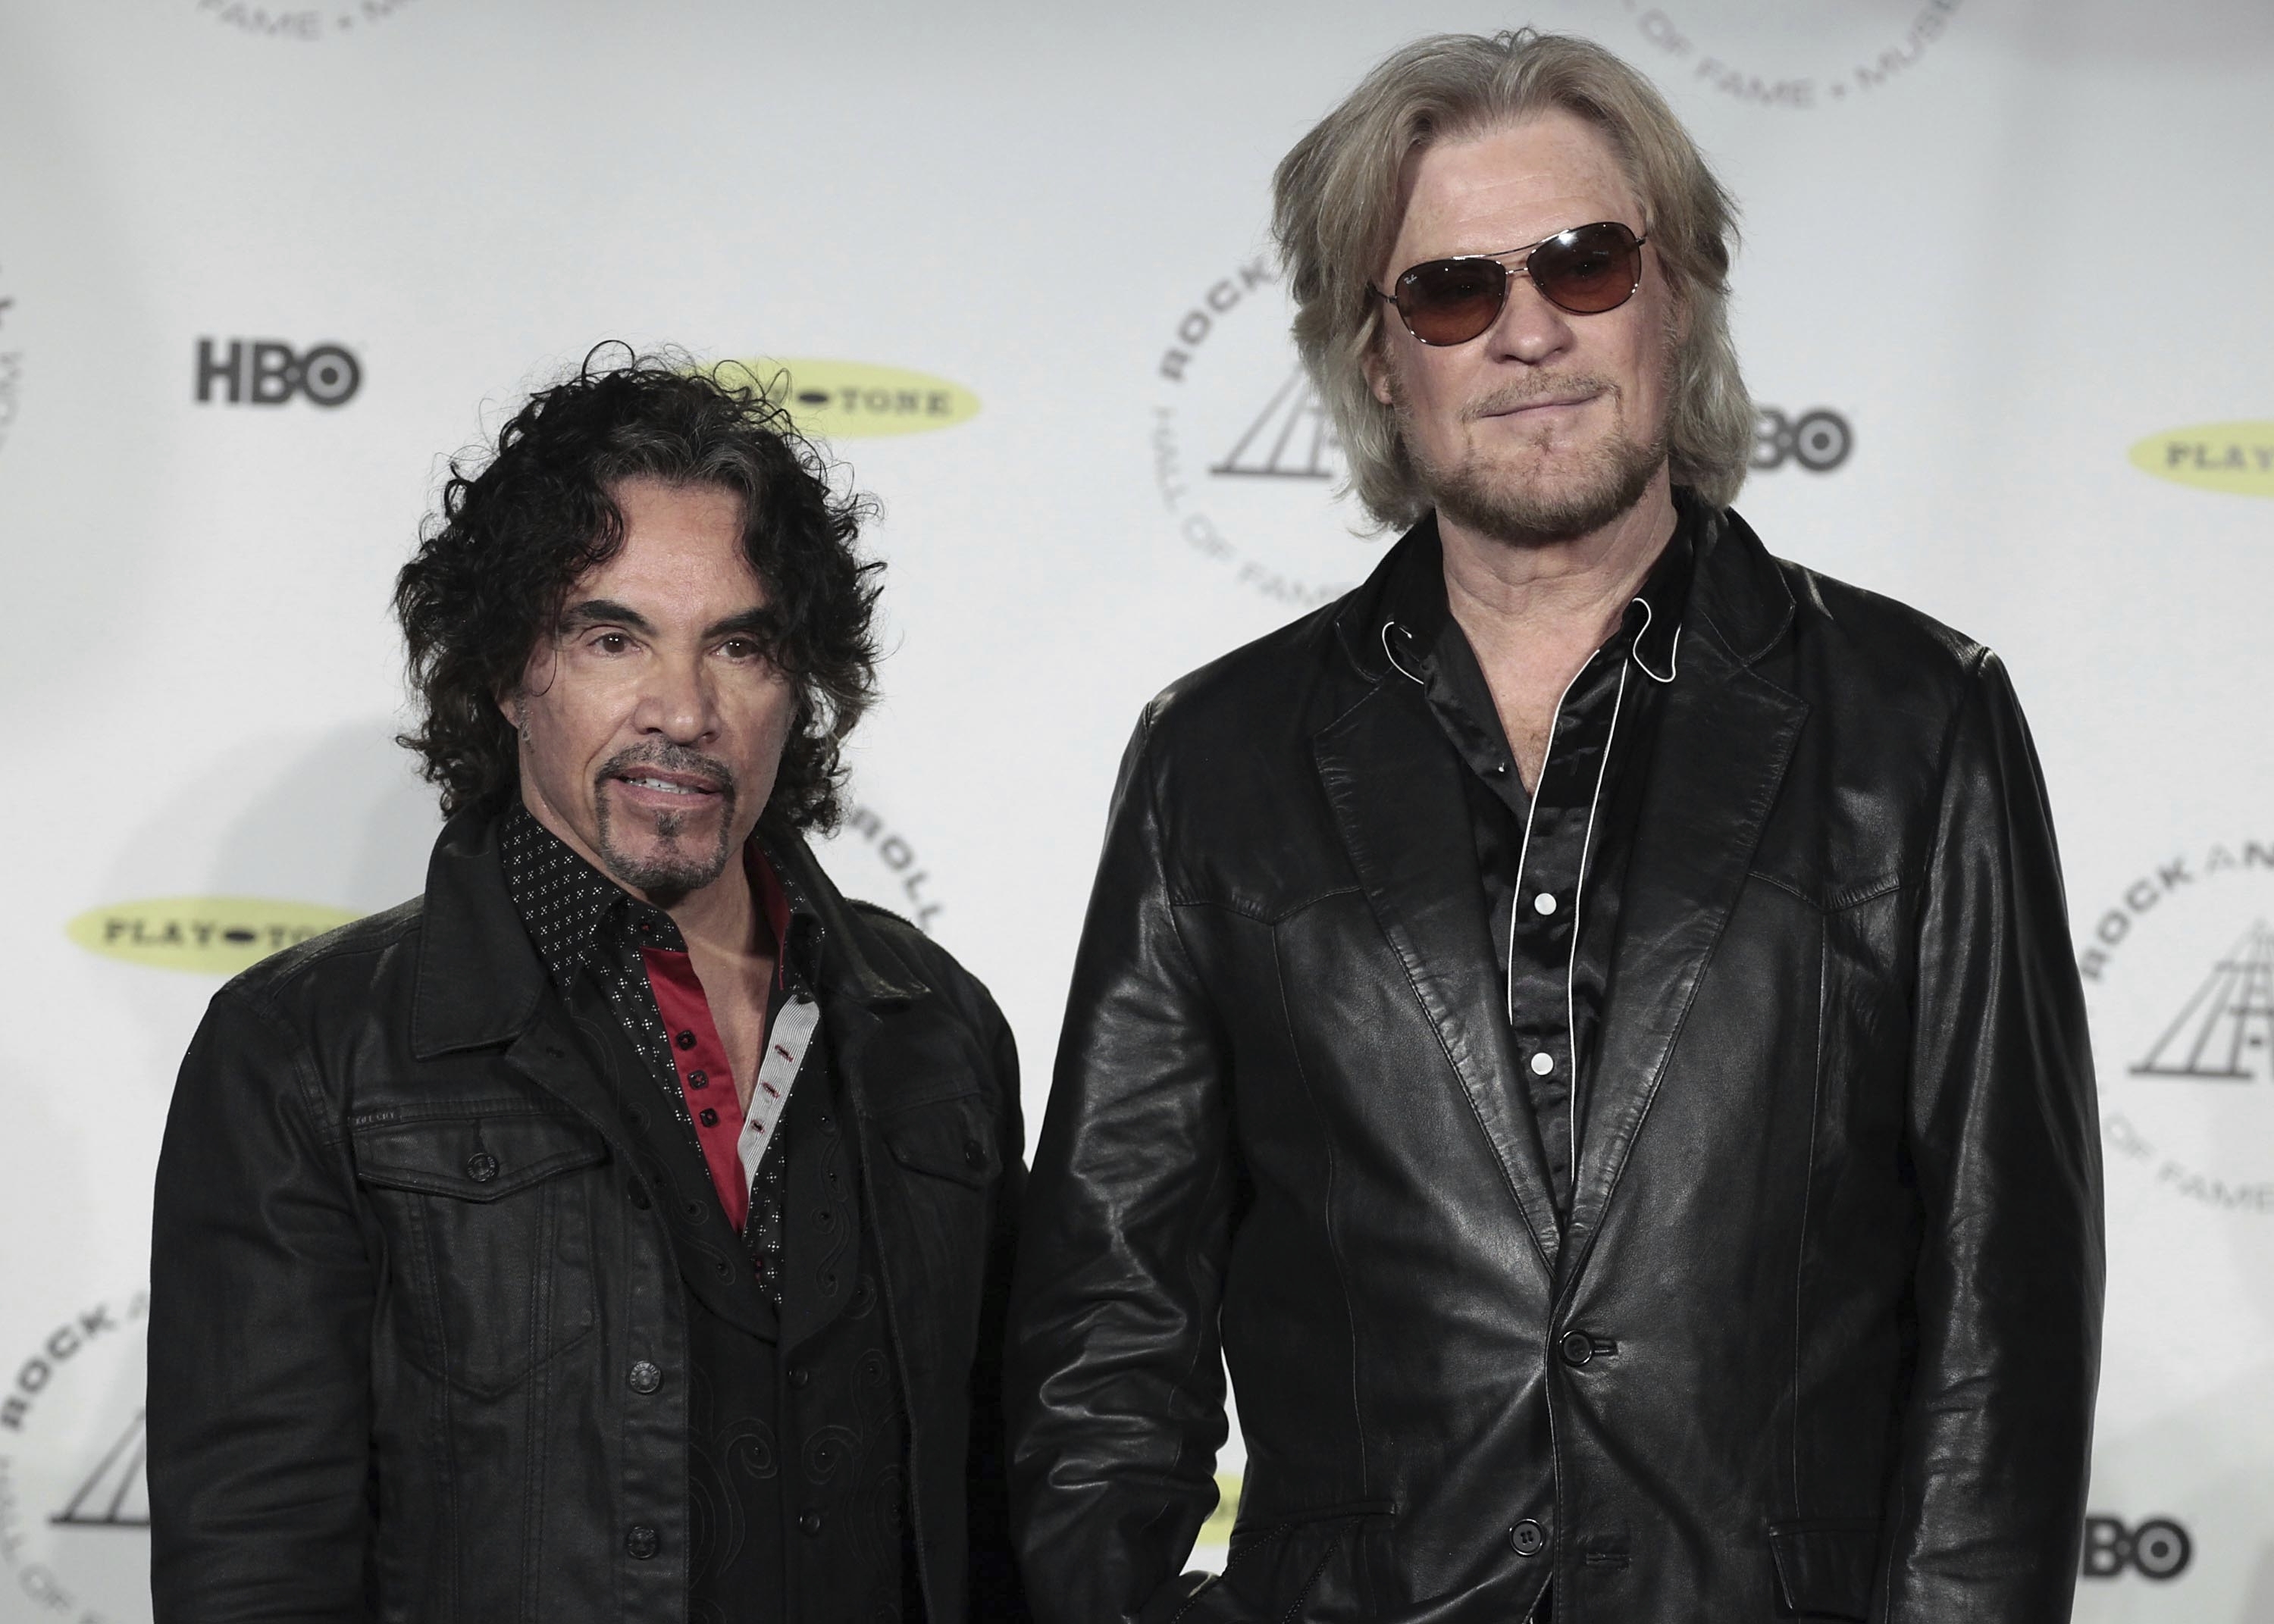 Daryl Hall accuses John Oates of ‘ultimate partnership betrayal' in
plan to sell stake in business